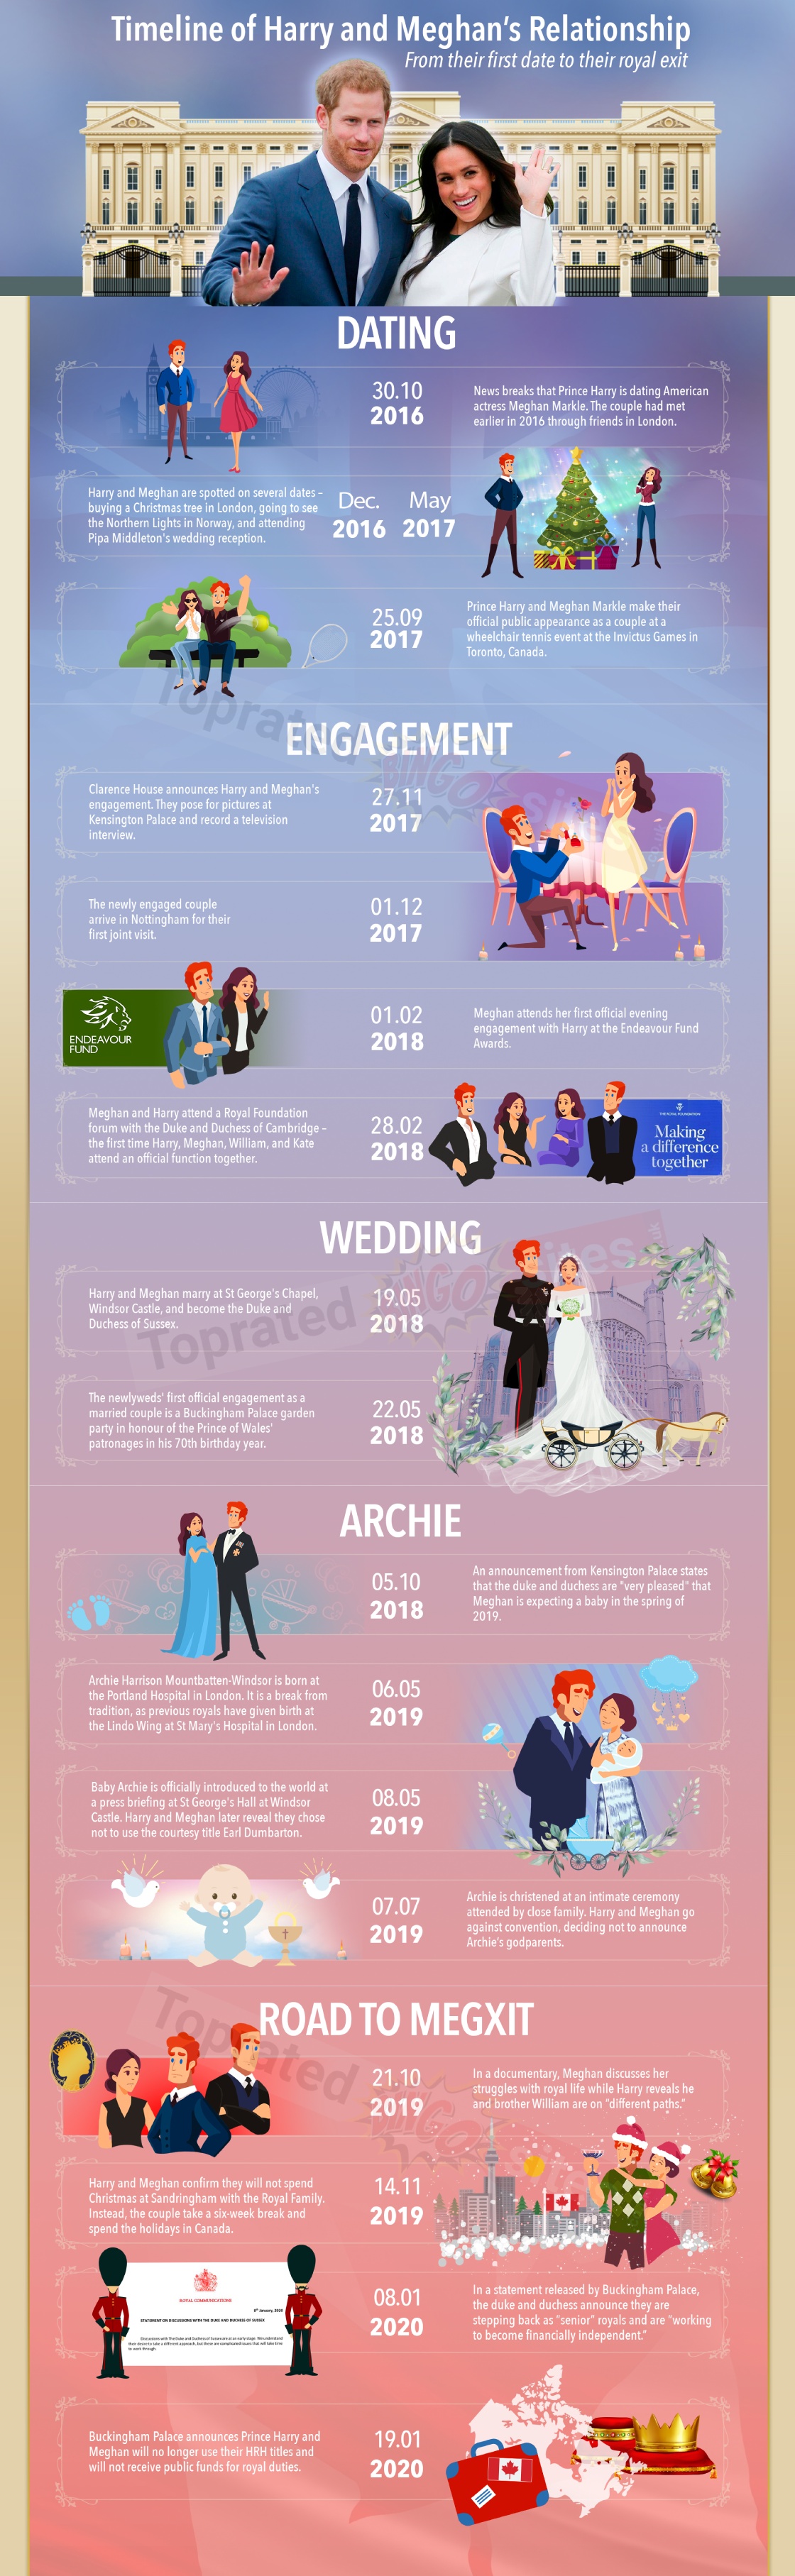 Timeline of Harry and Meghan’s relationship, an infographic